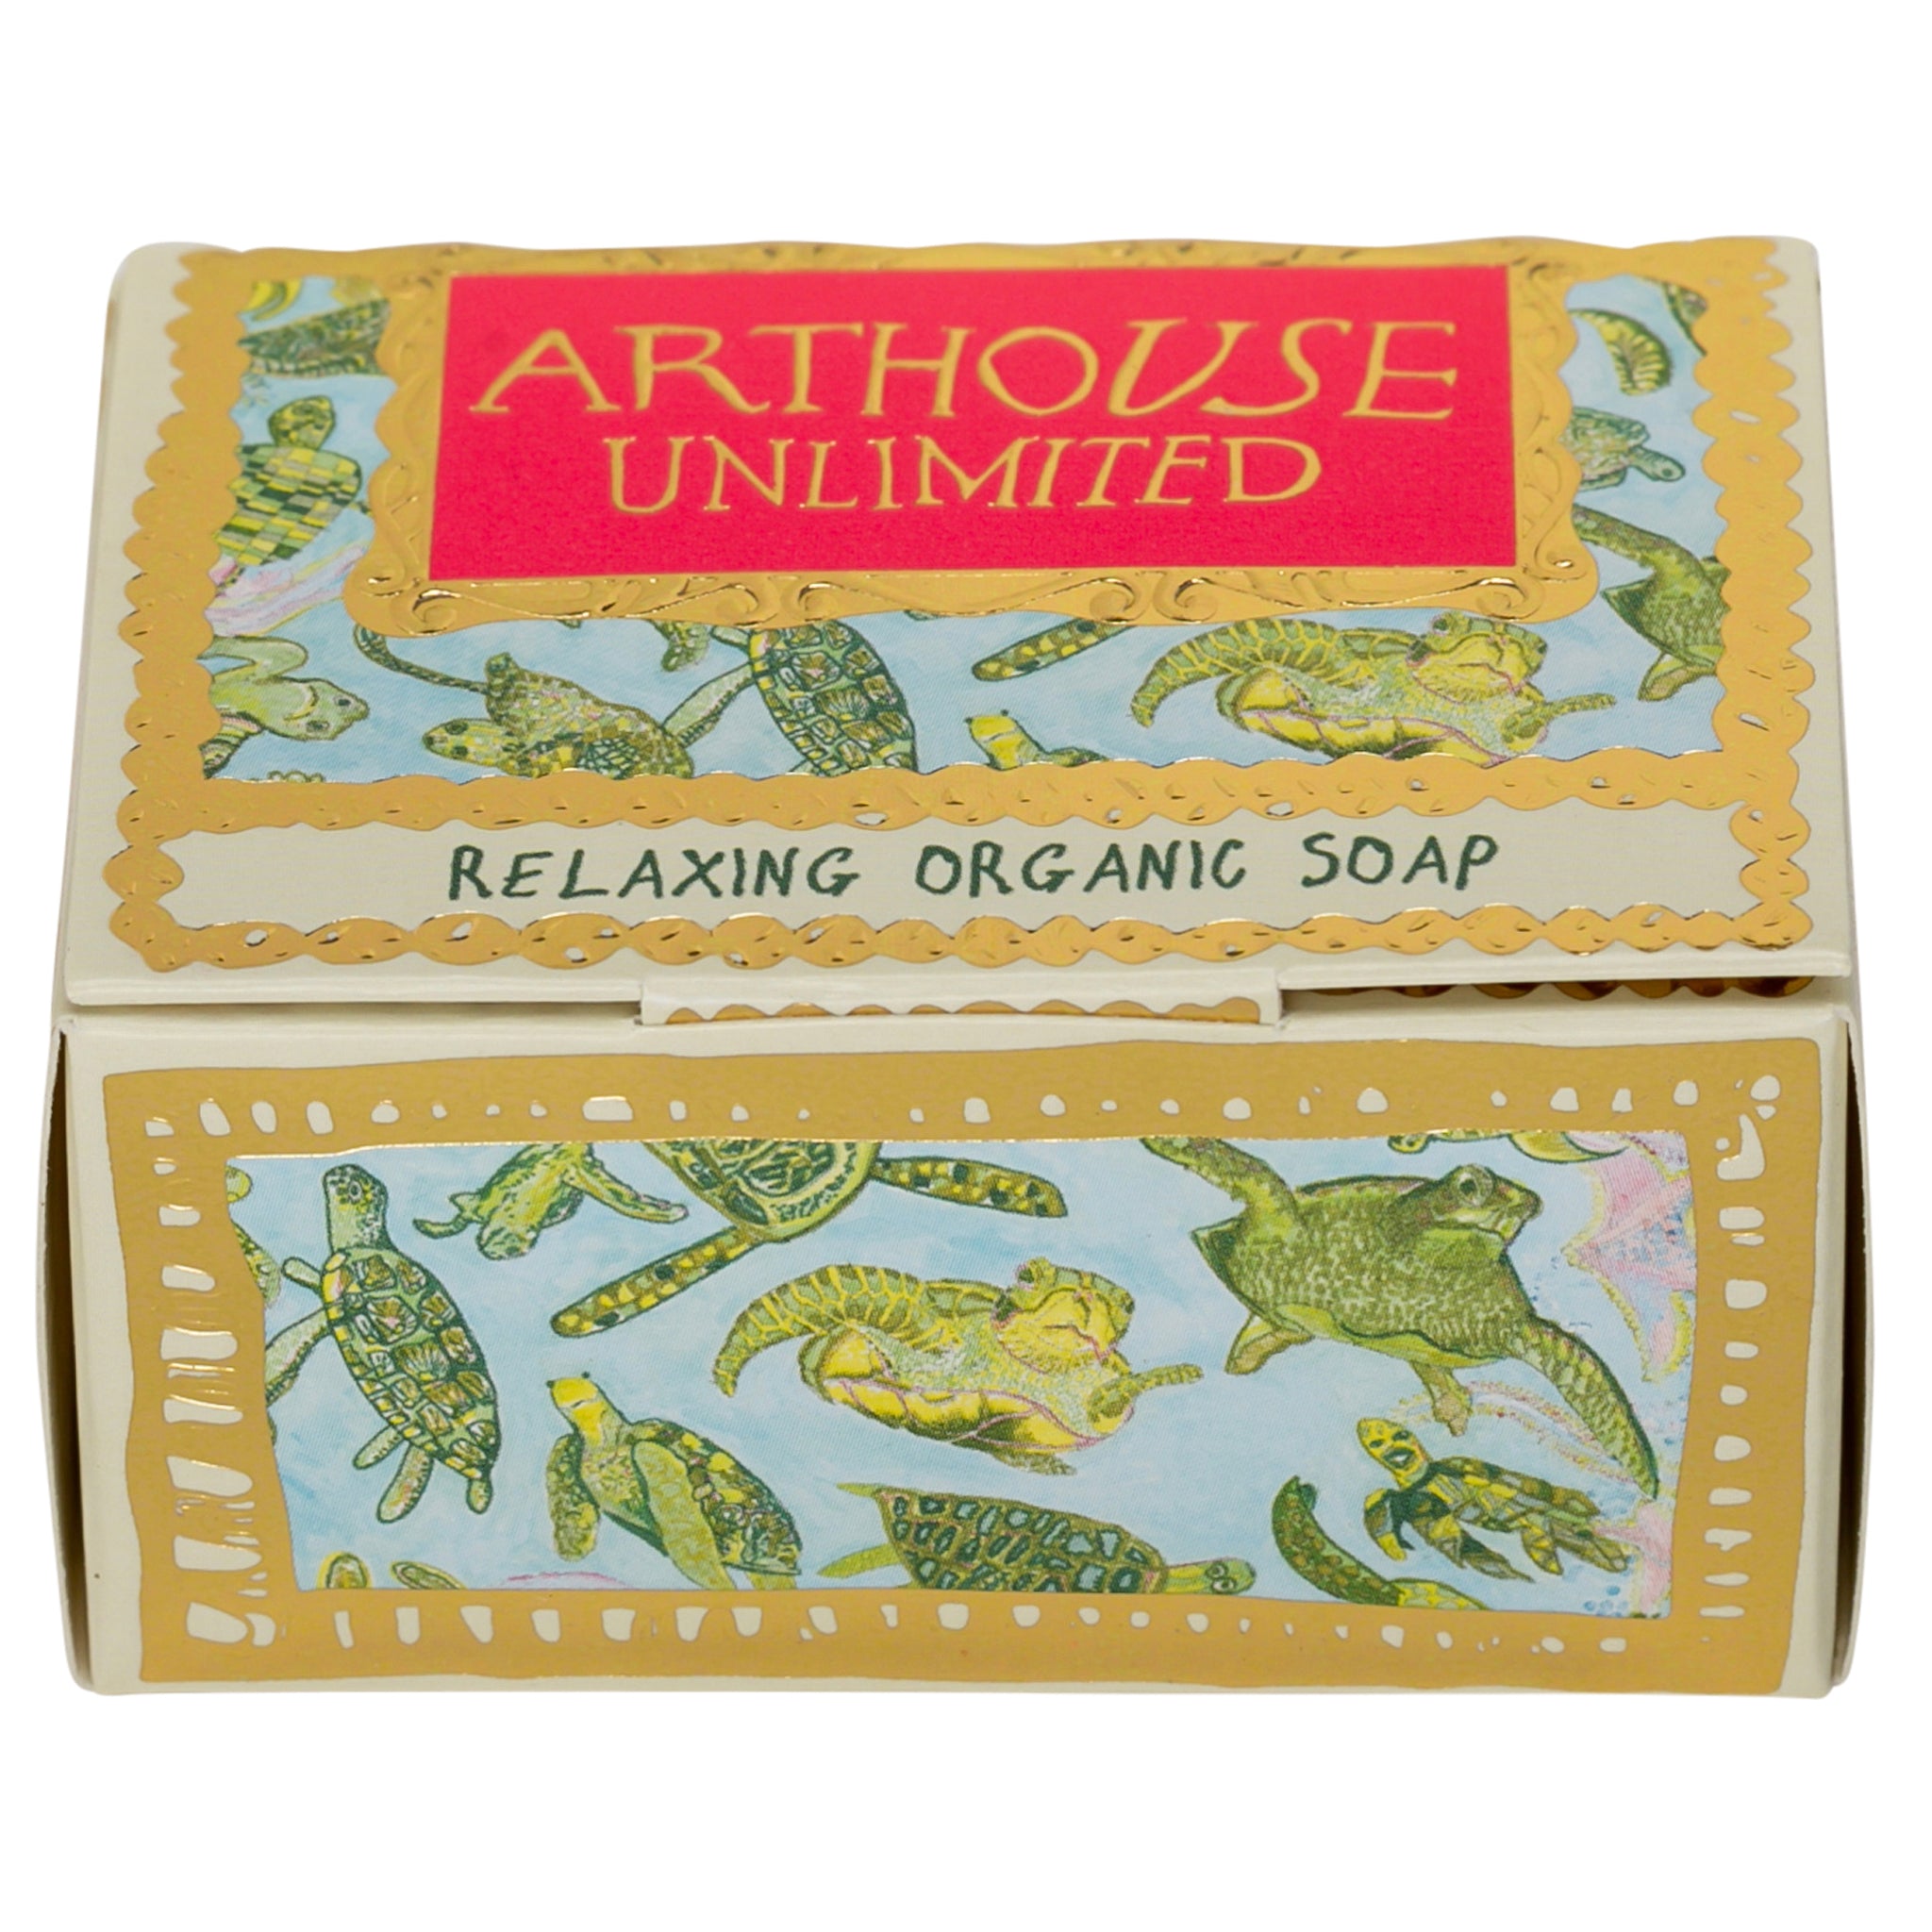 Turtles, Triple Milled Organic Soap  in light blue and gold box